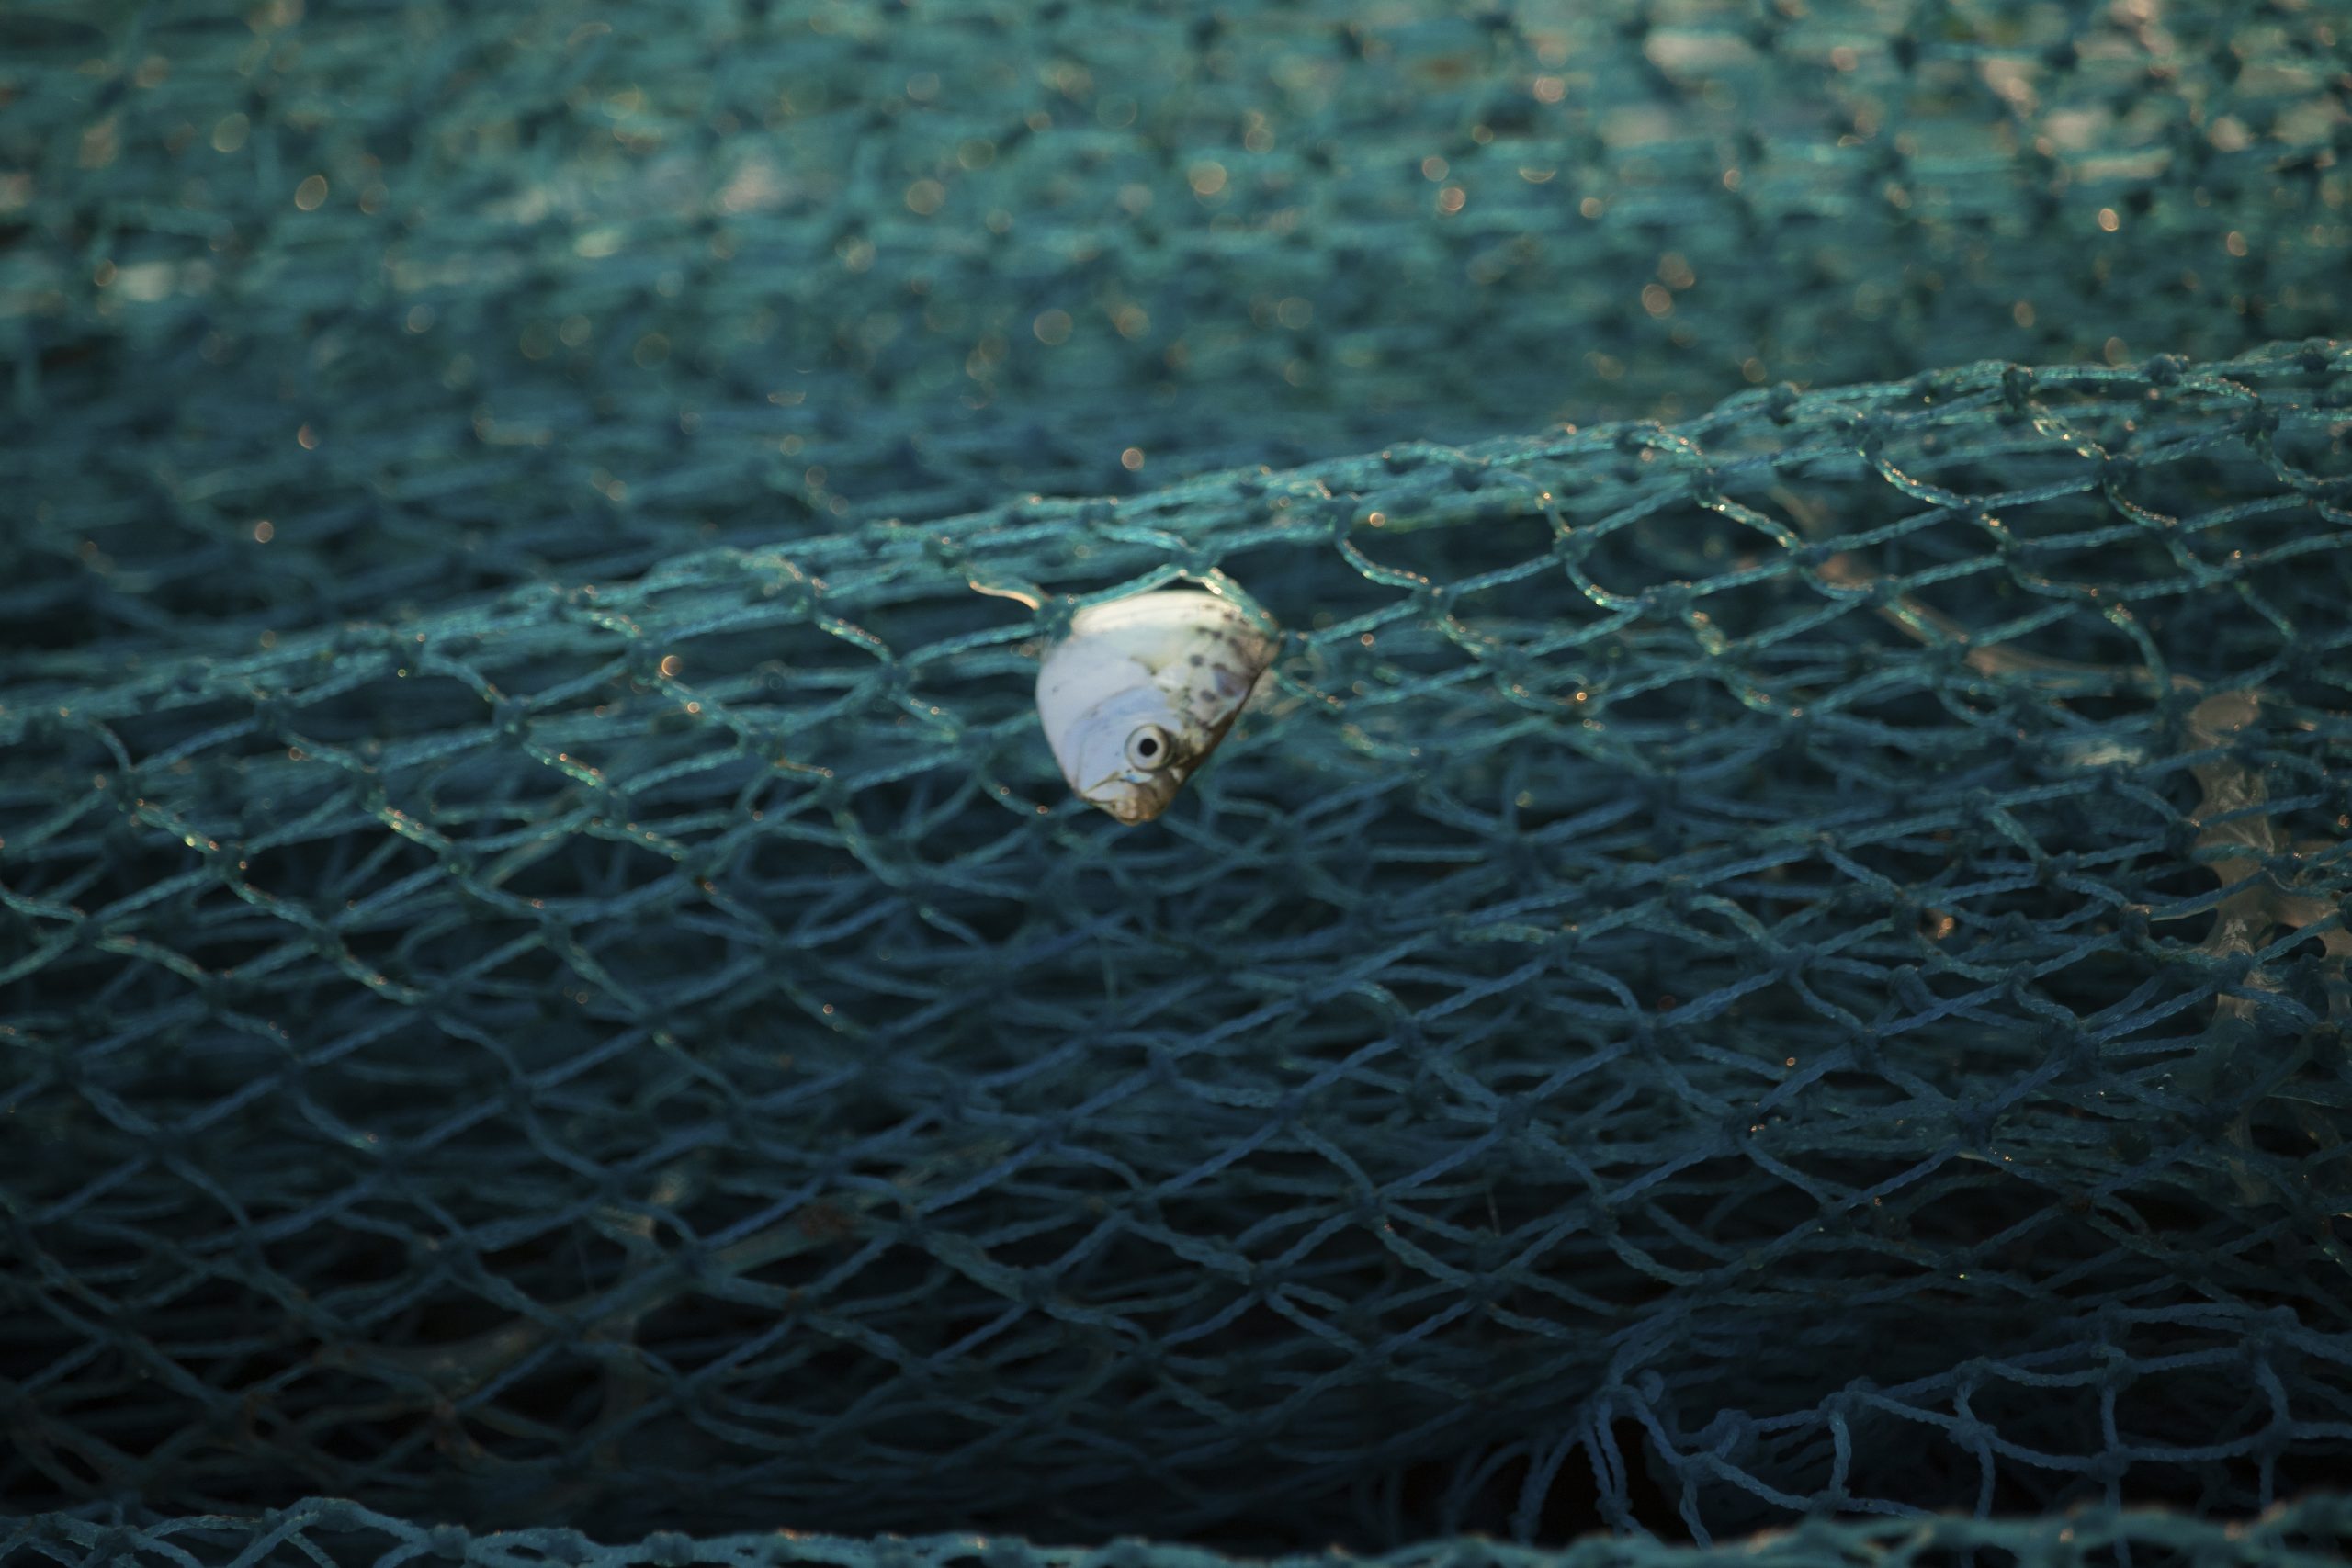 Fish caught in the net